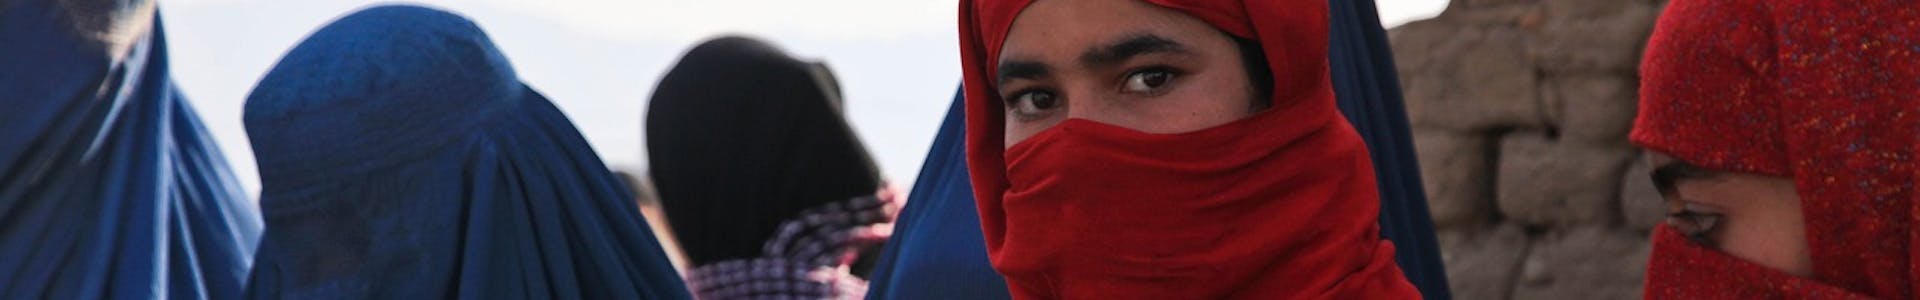 Afghanistan women - how UK failed the people